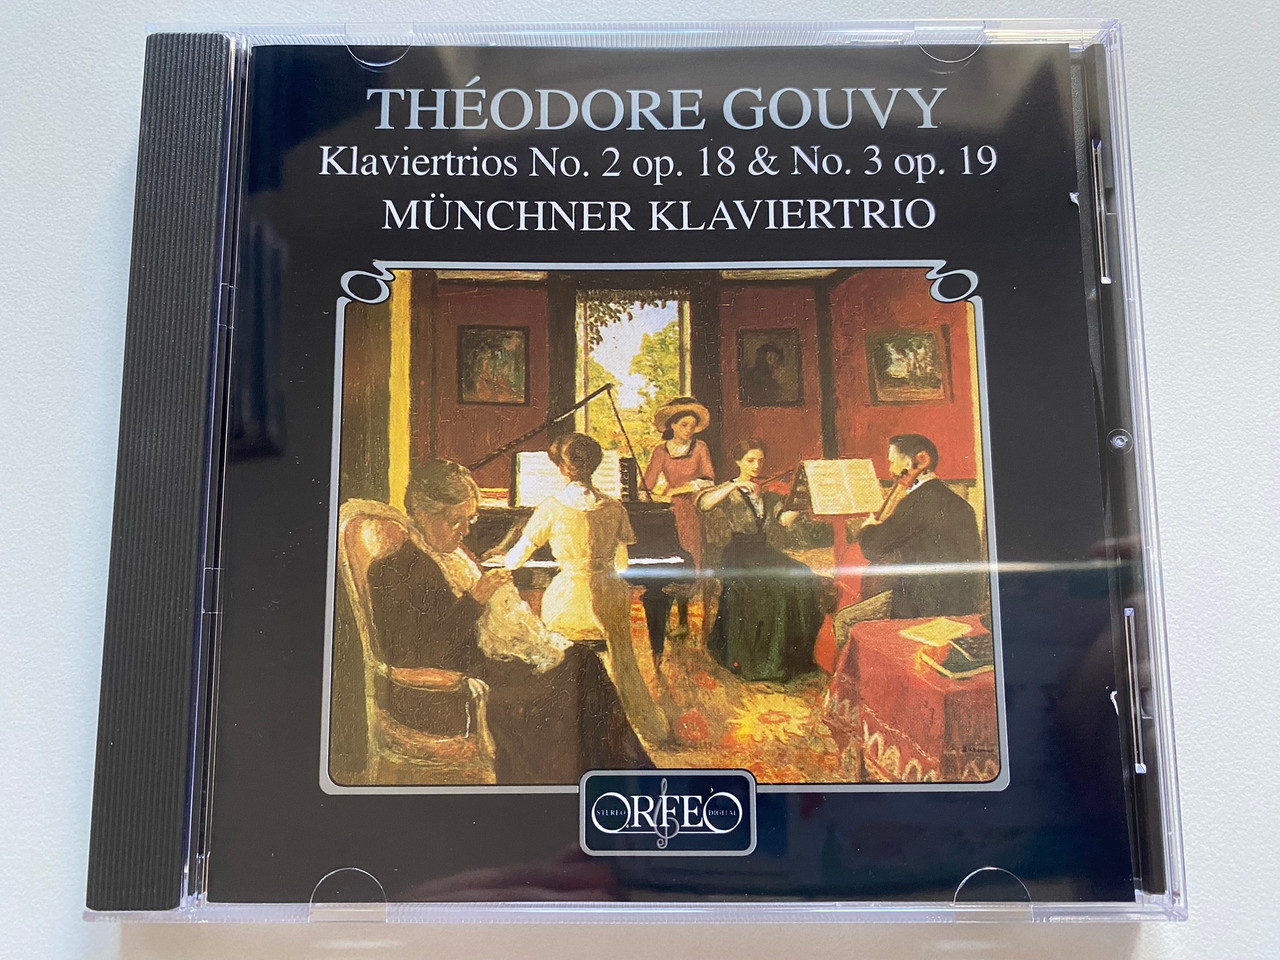 https://cdn11.bigcommerce.com/s-62bdpkt7pb/products/0/images/328140/Theodore_Gouvy_Klaviertrios_No._2_op._18_No._3_op._19_-_Munchner_Klaviertrio_Orfeo_Audio_CD_1998_Stereo_C_444_971_A_1__94991.1710840890.1280.1280.jpg?c=2